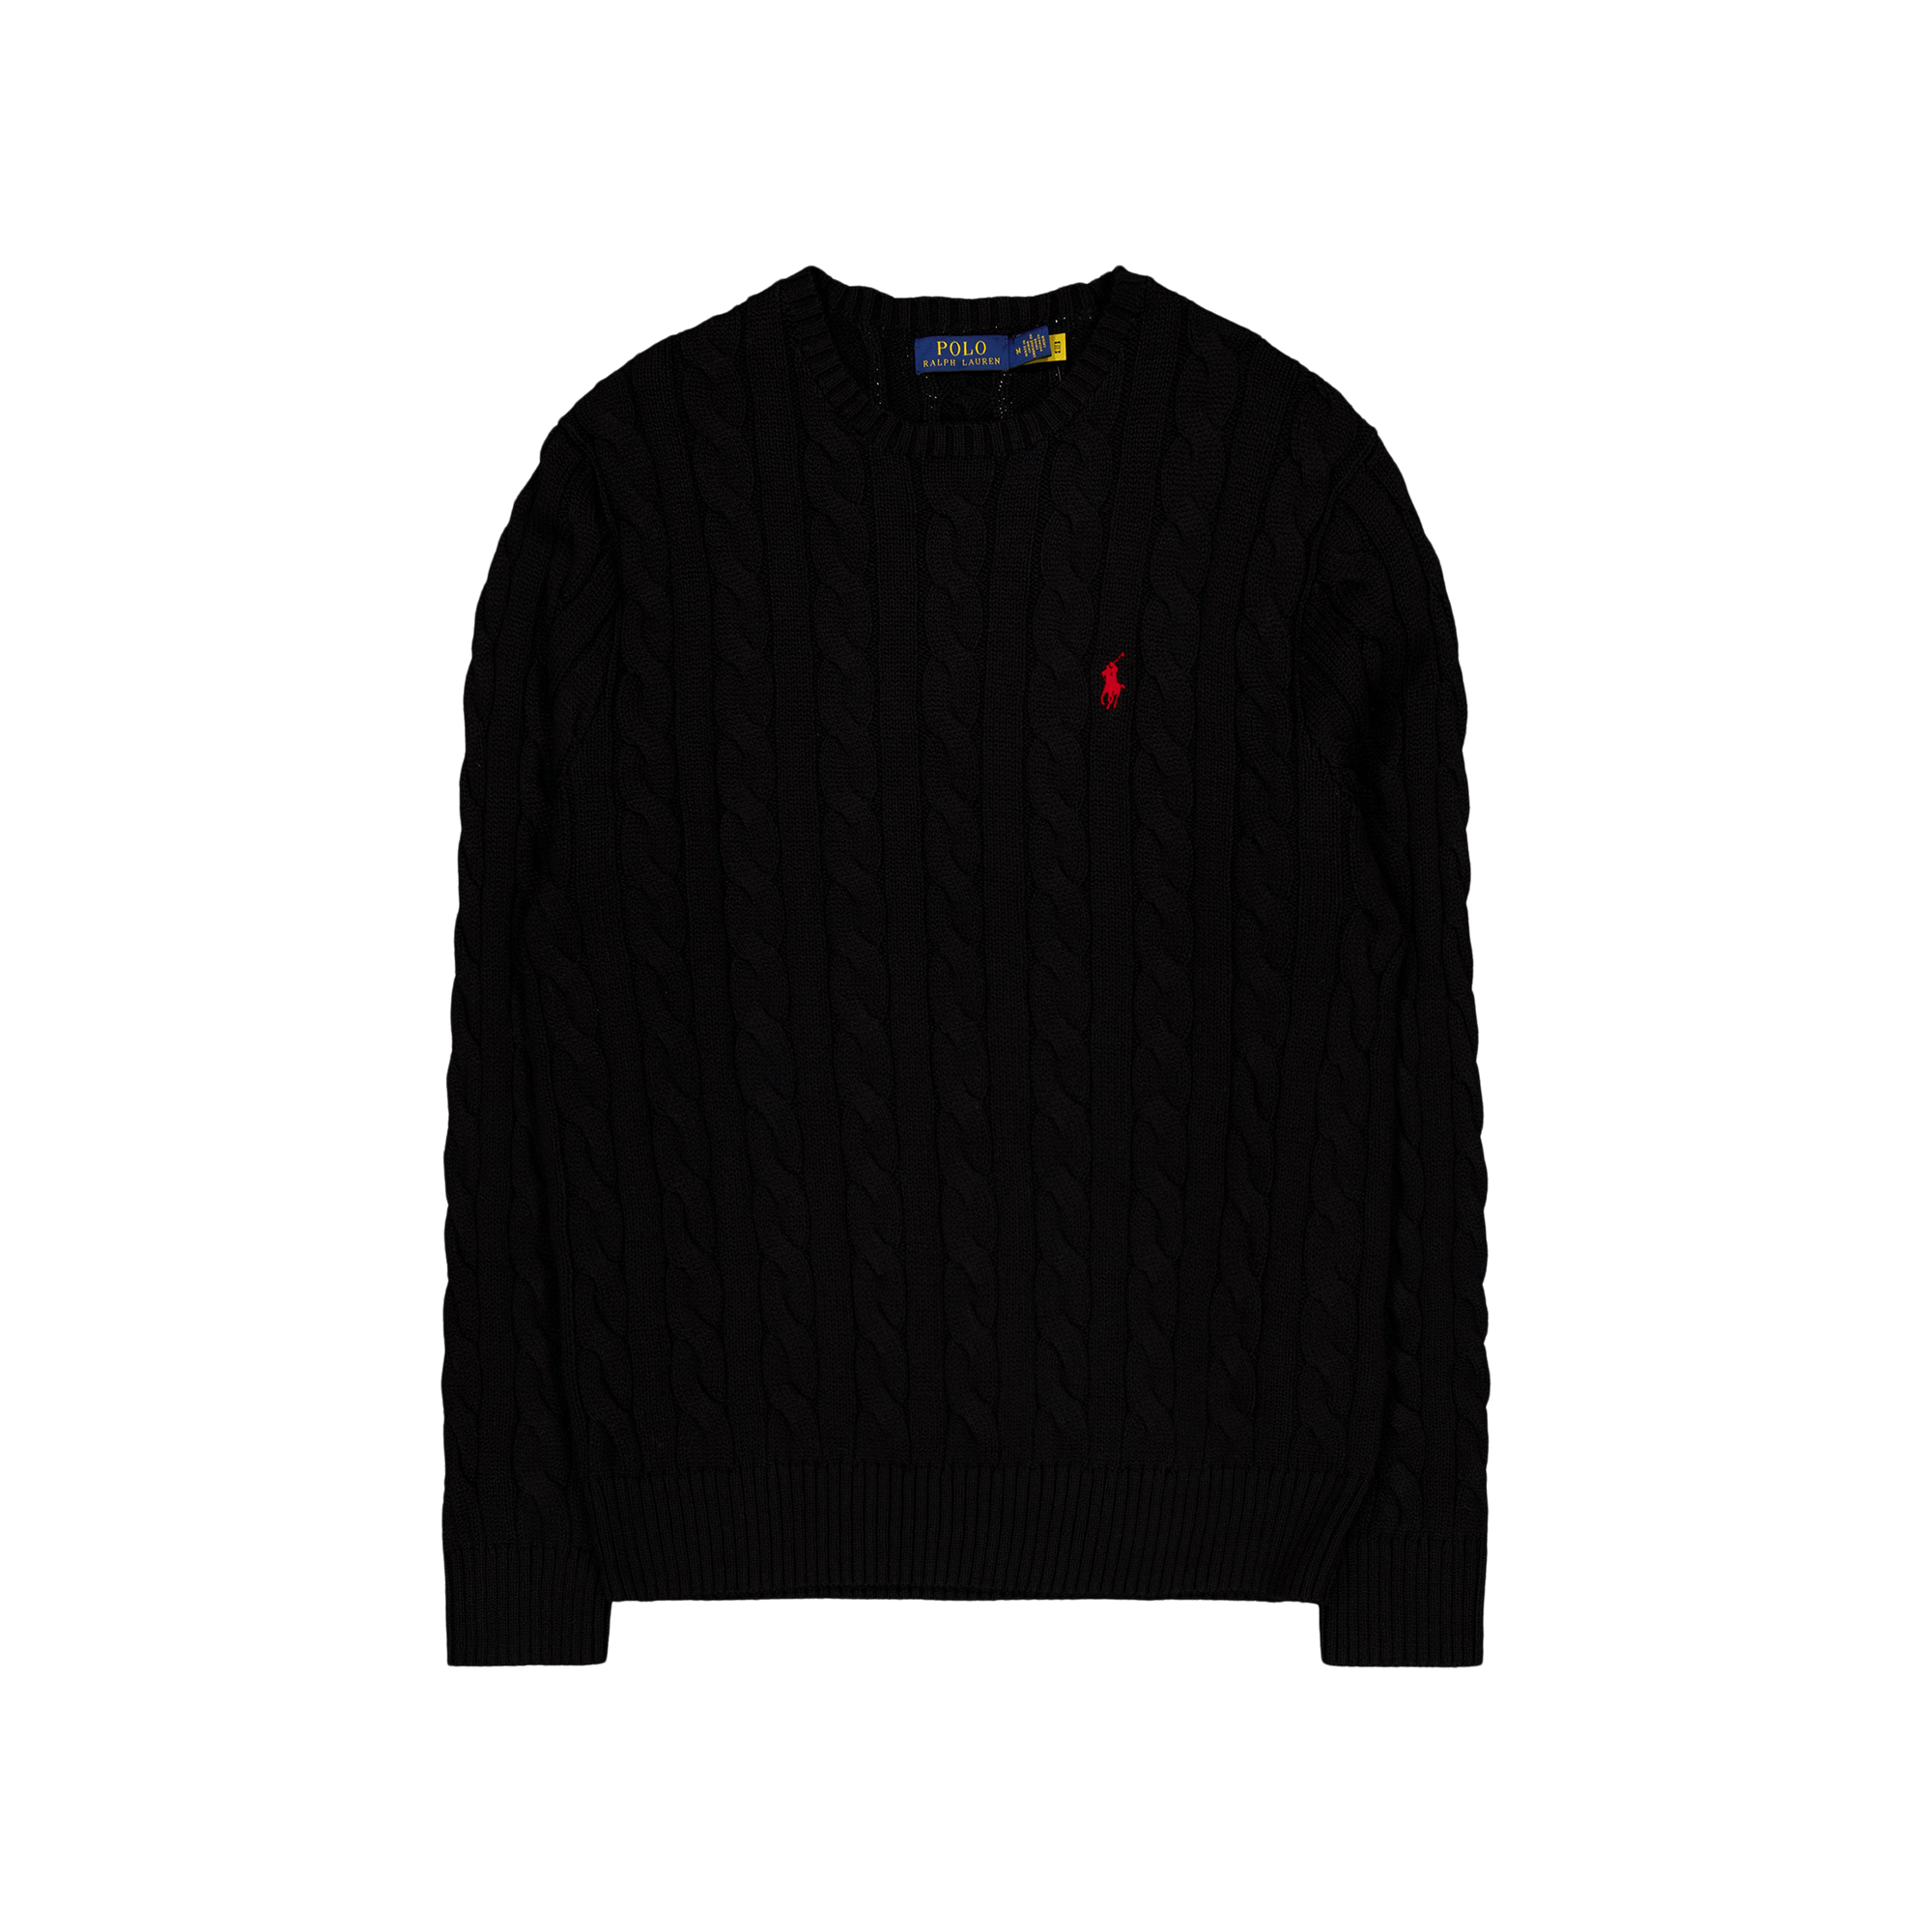 Cable-Knit Cotton Sweater Polo Black